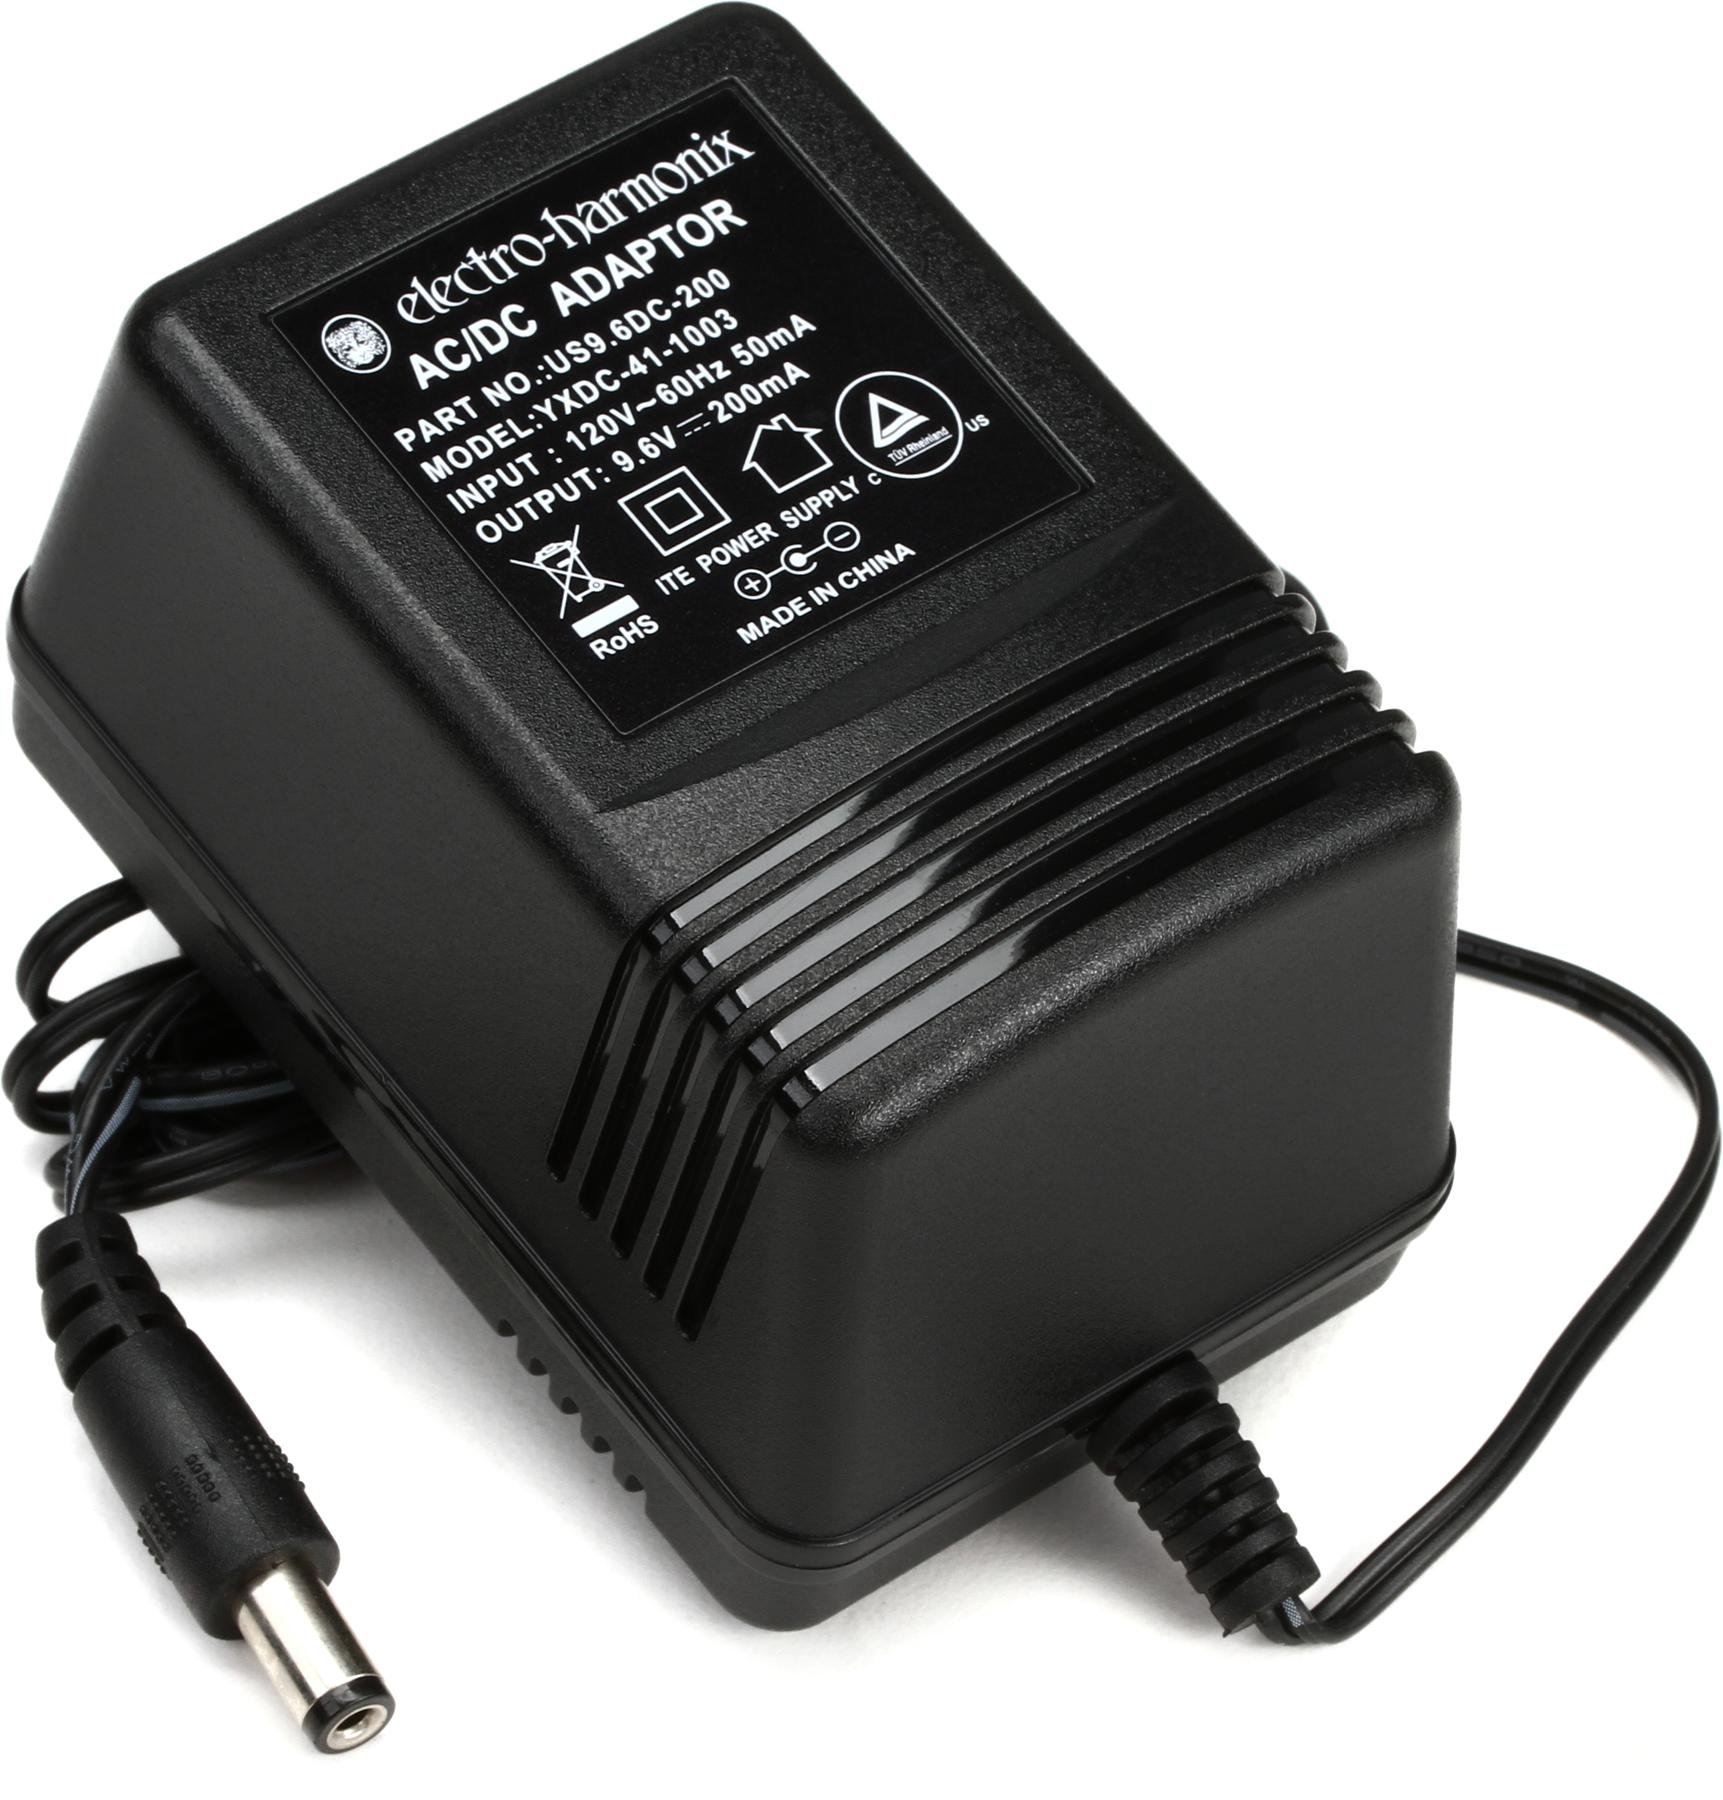 UK plug Premium MyVolts 9V power supply adaptor compatible with Electro-Harmonix Bass Big Muff Pi Effects pedal 